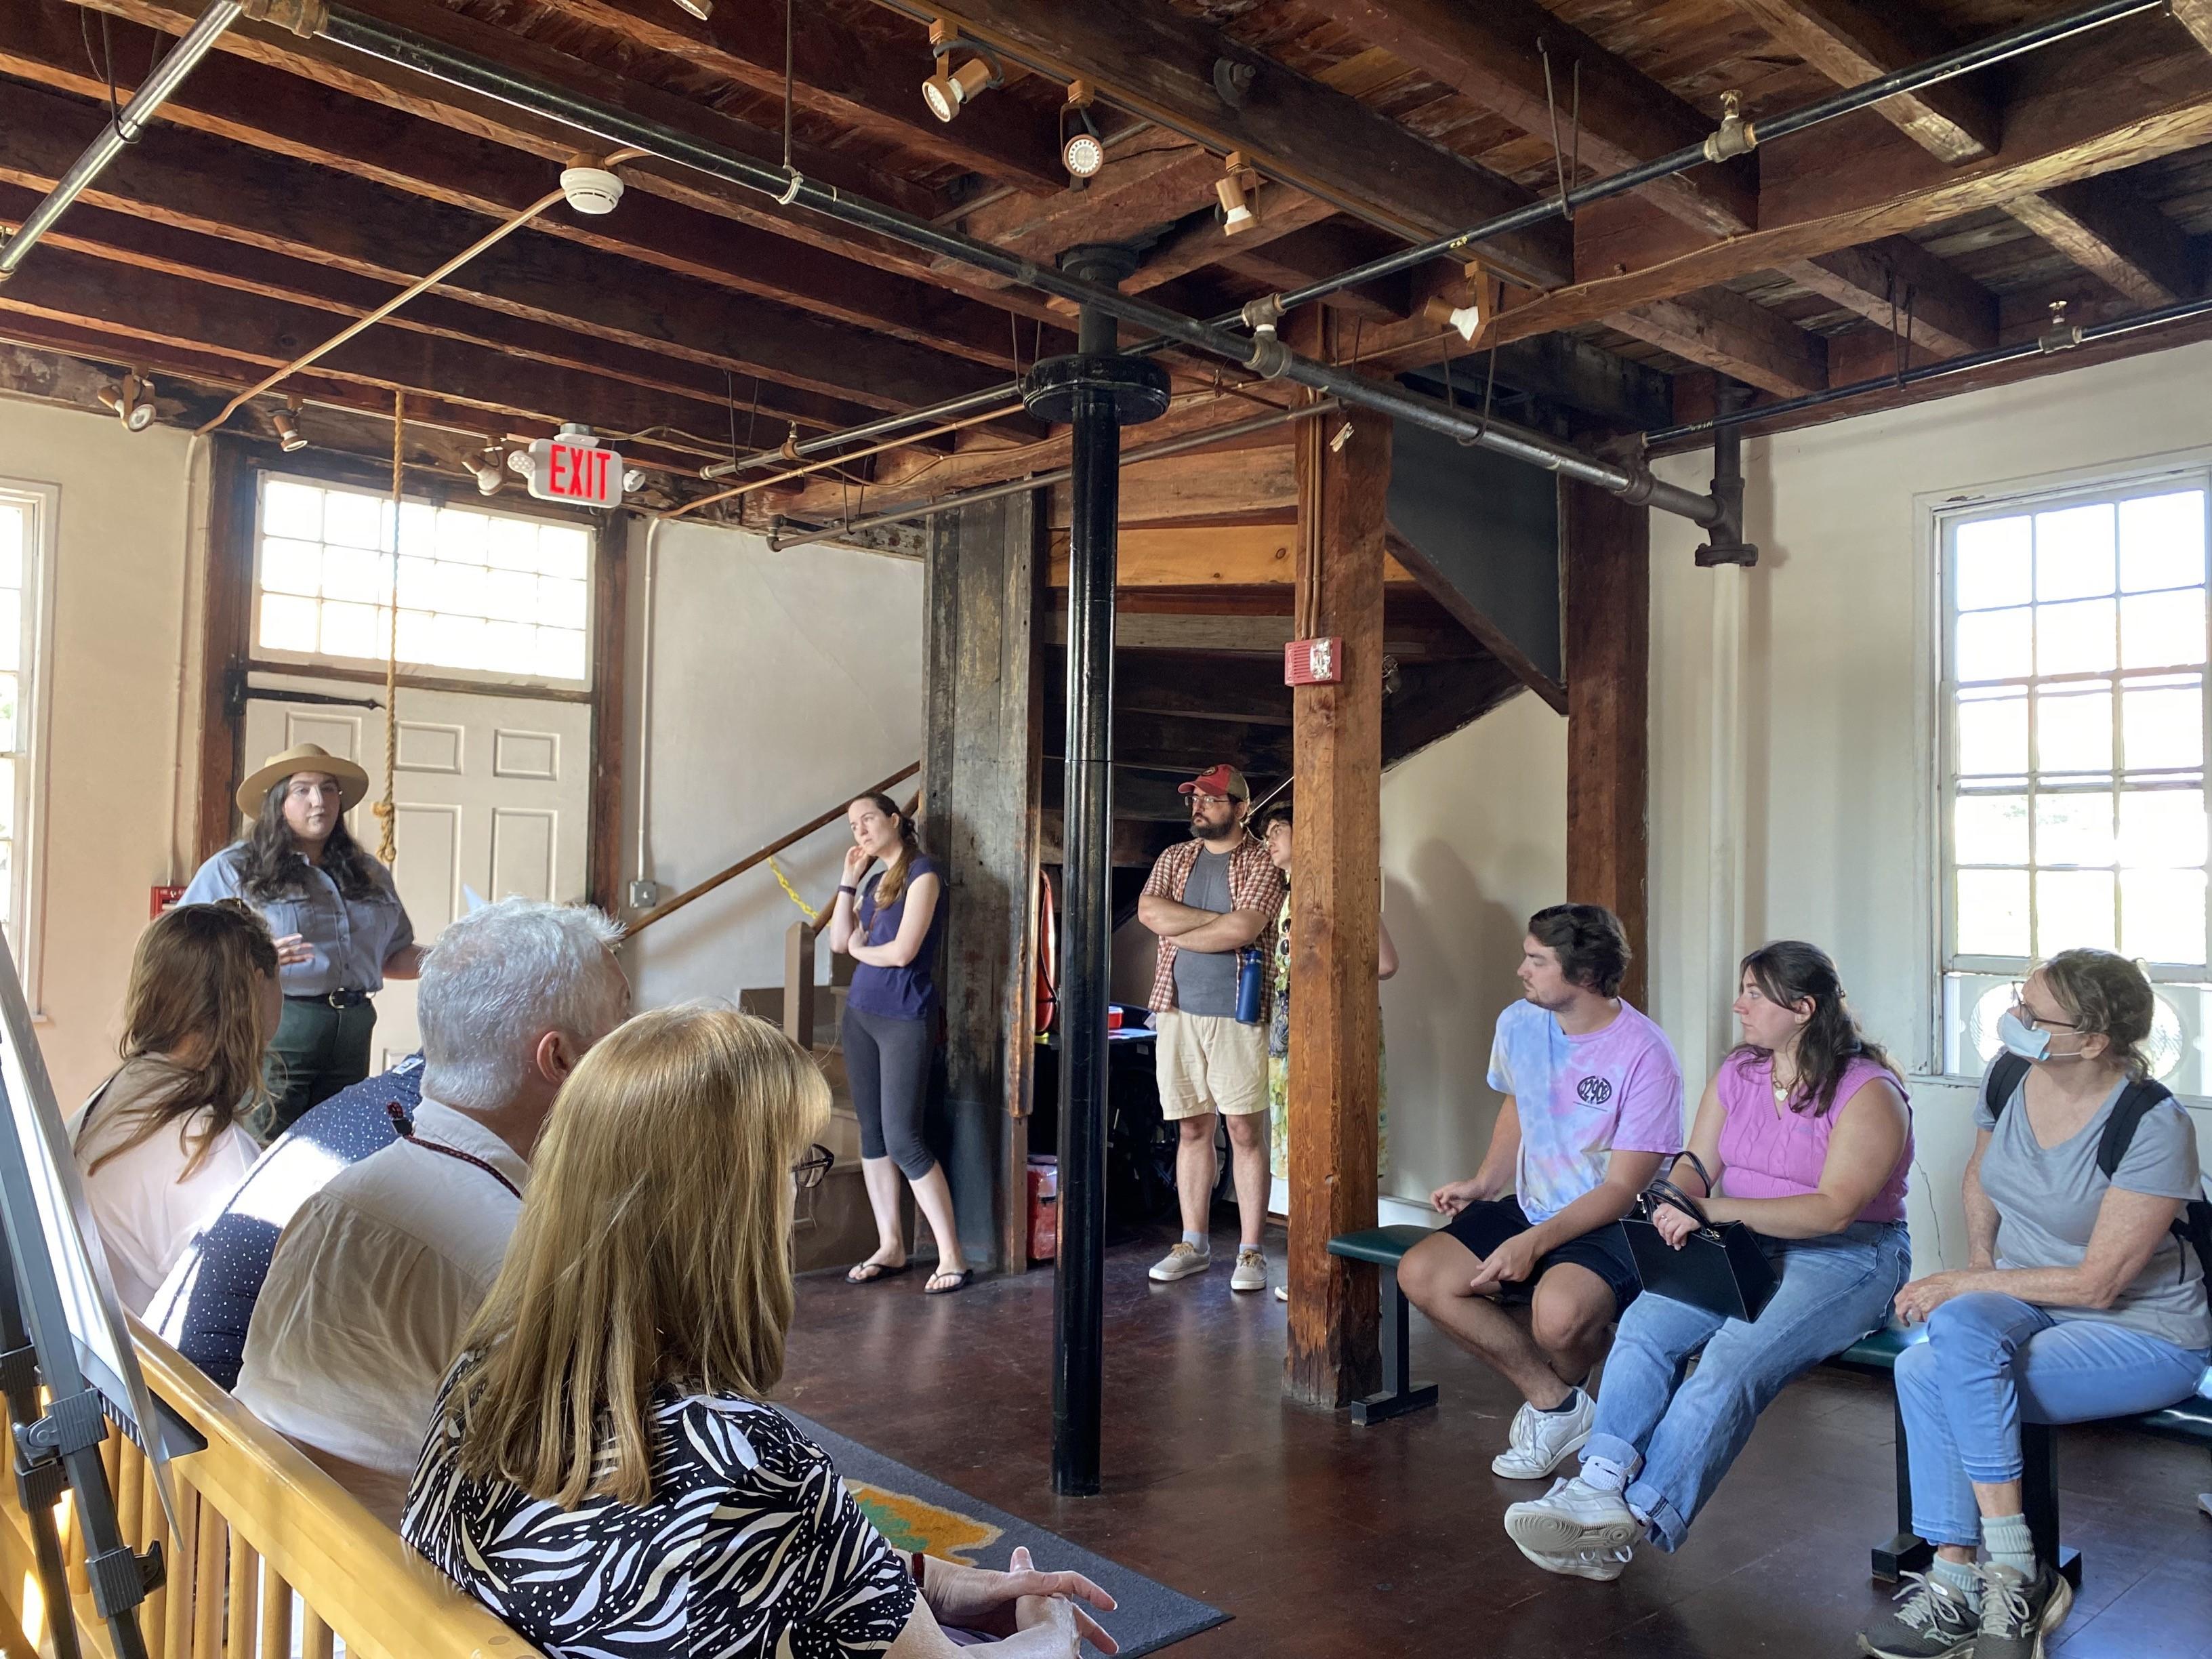 Group of visitors sitting and standing while listening to Park Ranger inside of wood framed building